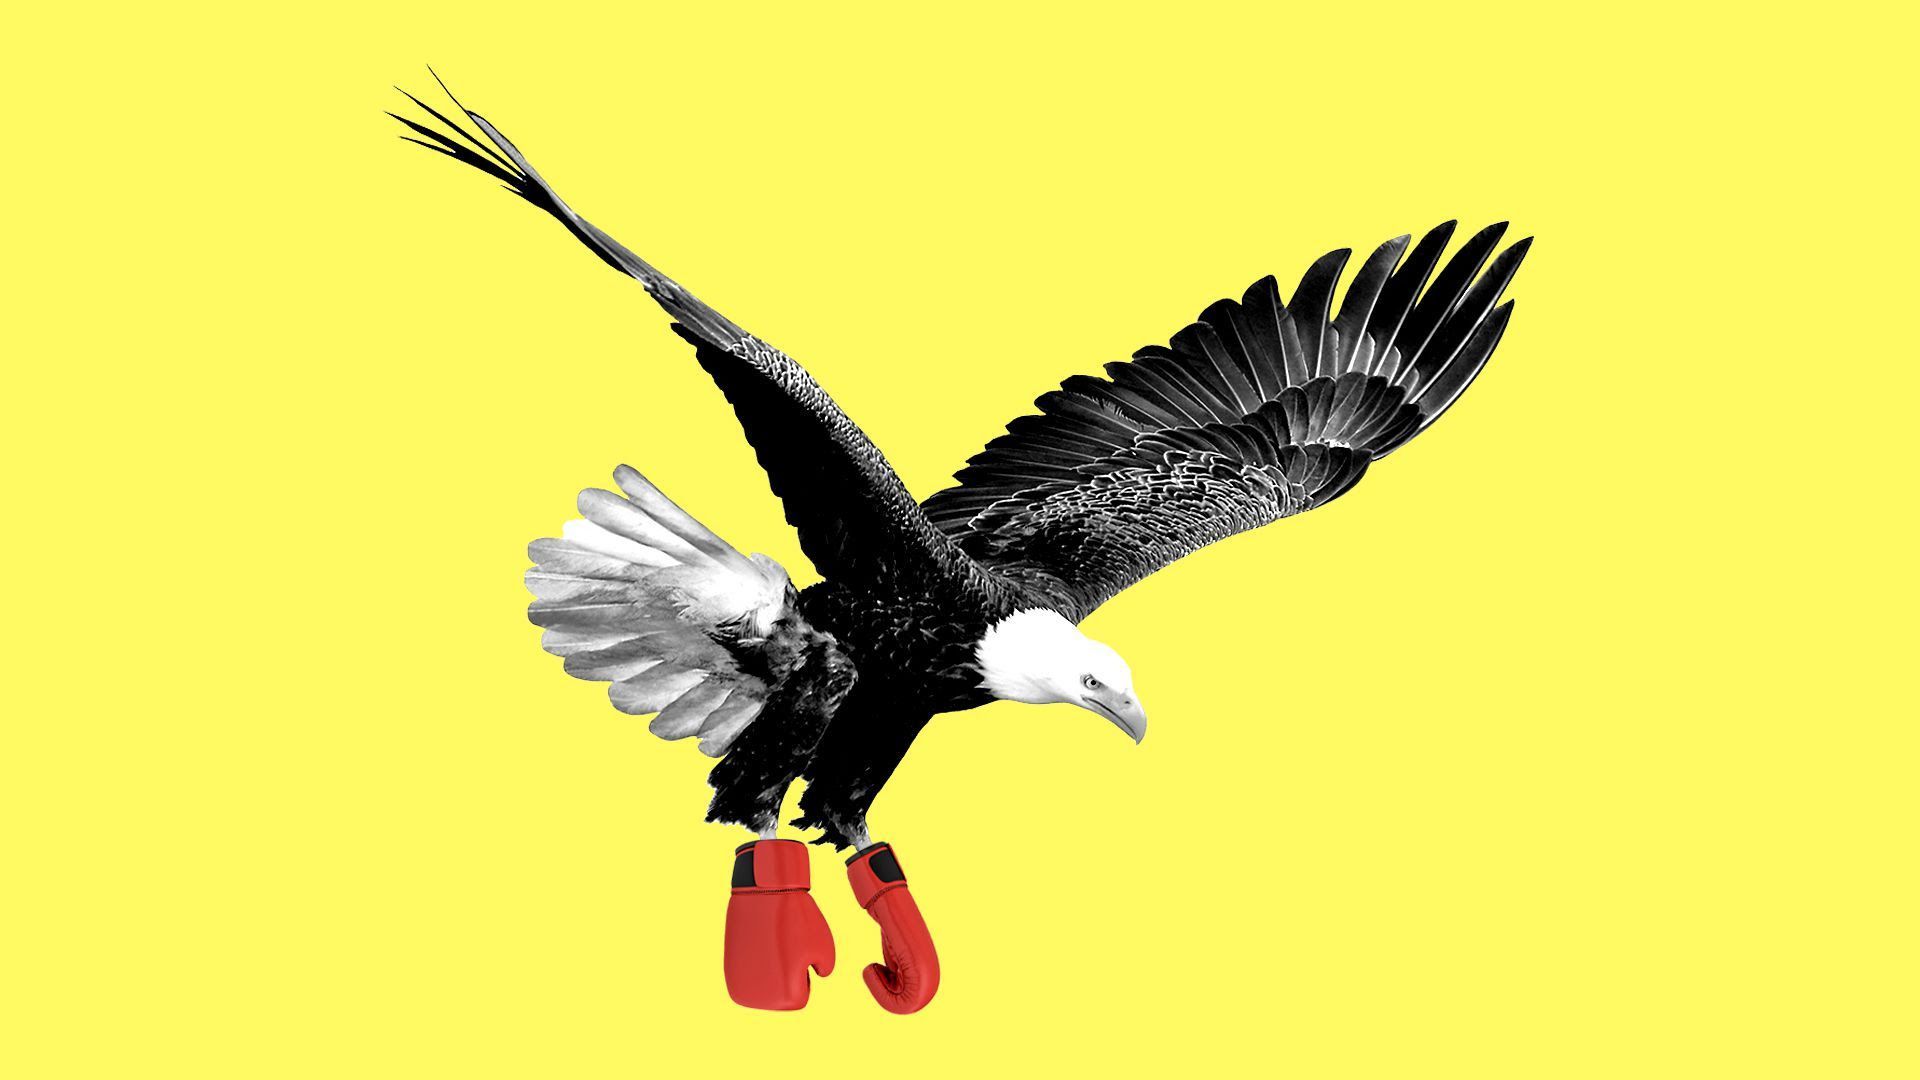 An illustration of an eagle with boxing gloves on